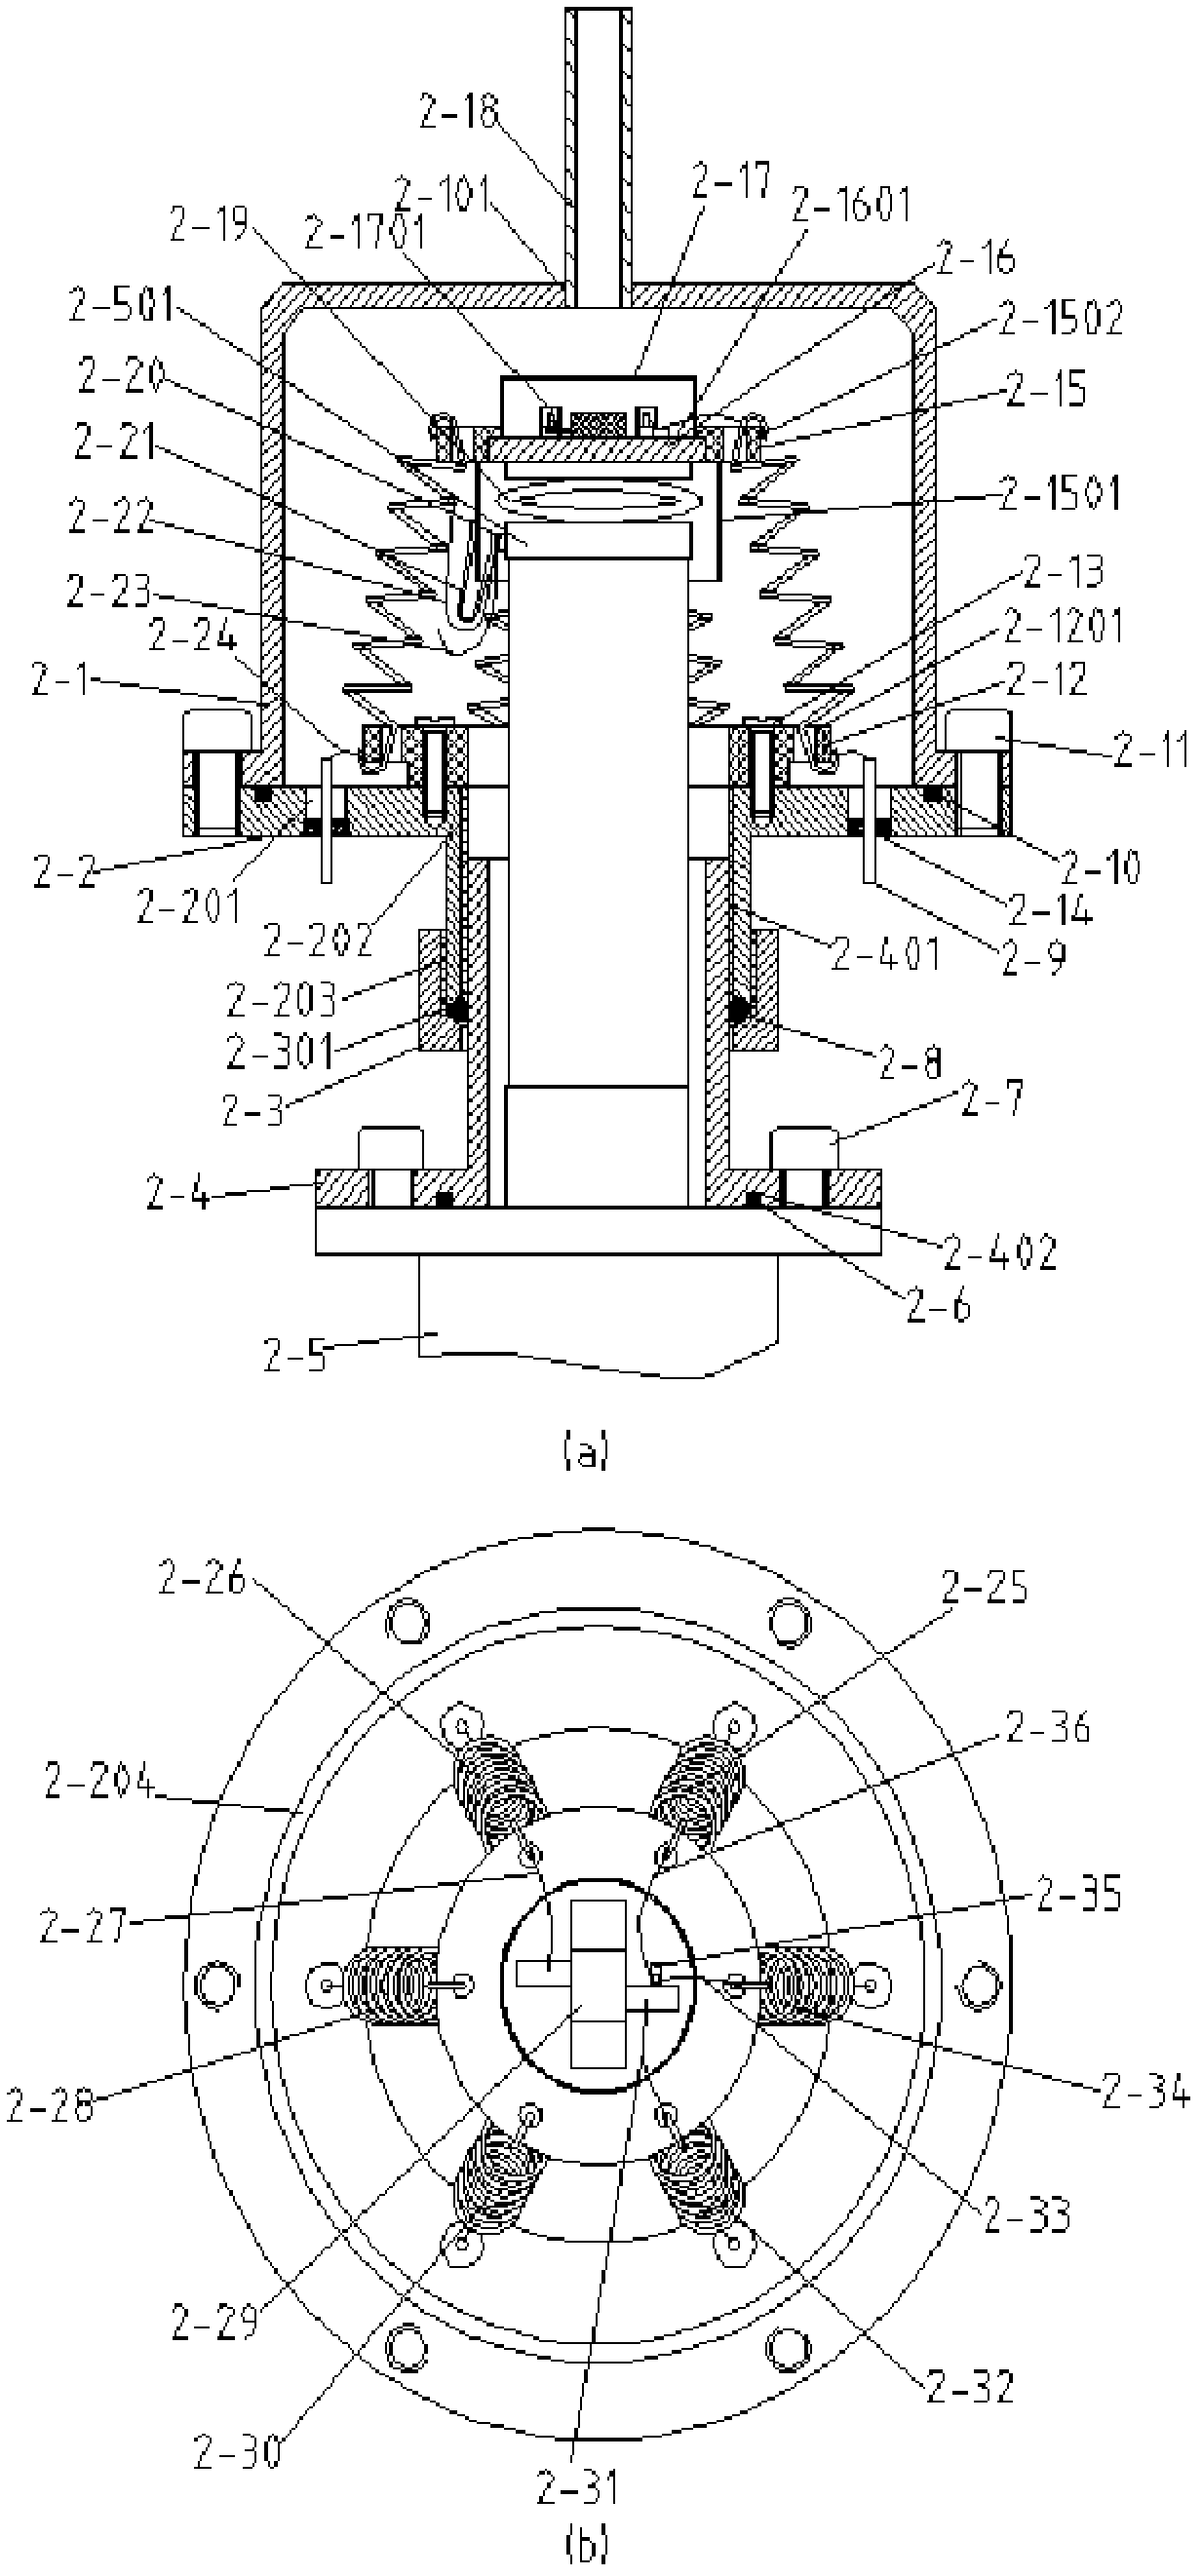 Heat load test method and device for split type dewar at different refrigeration temperatures